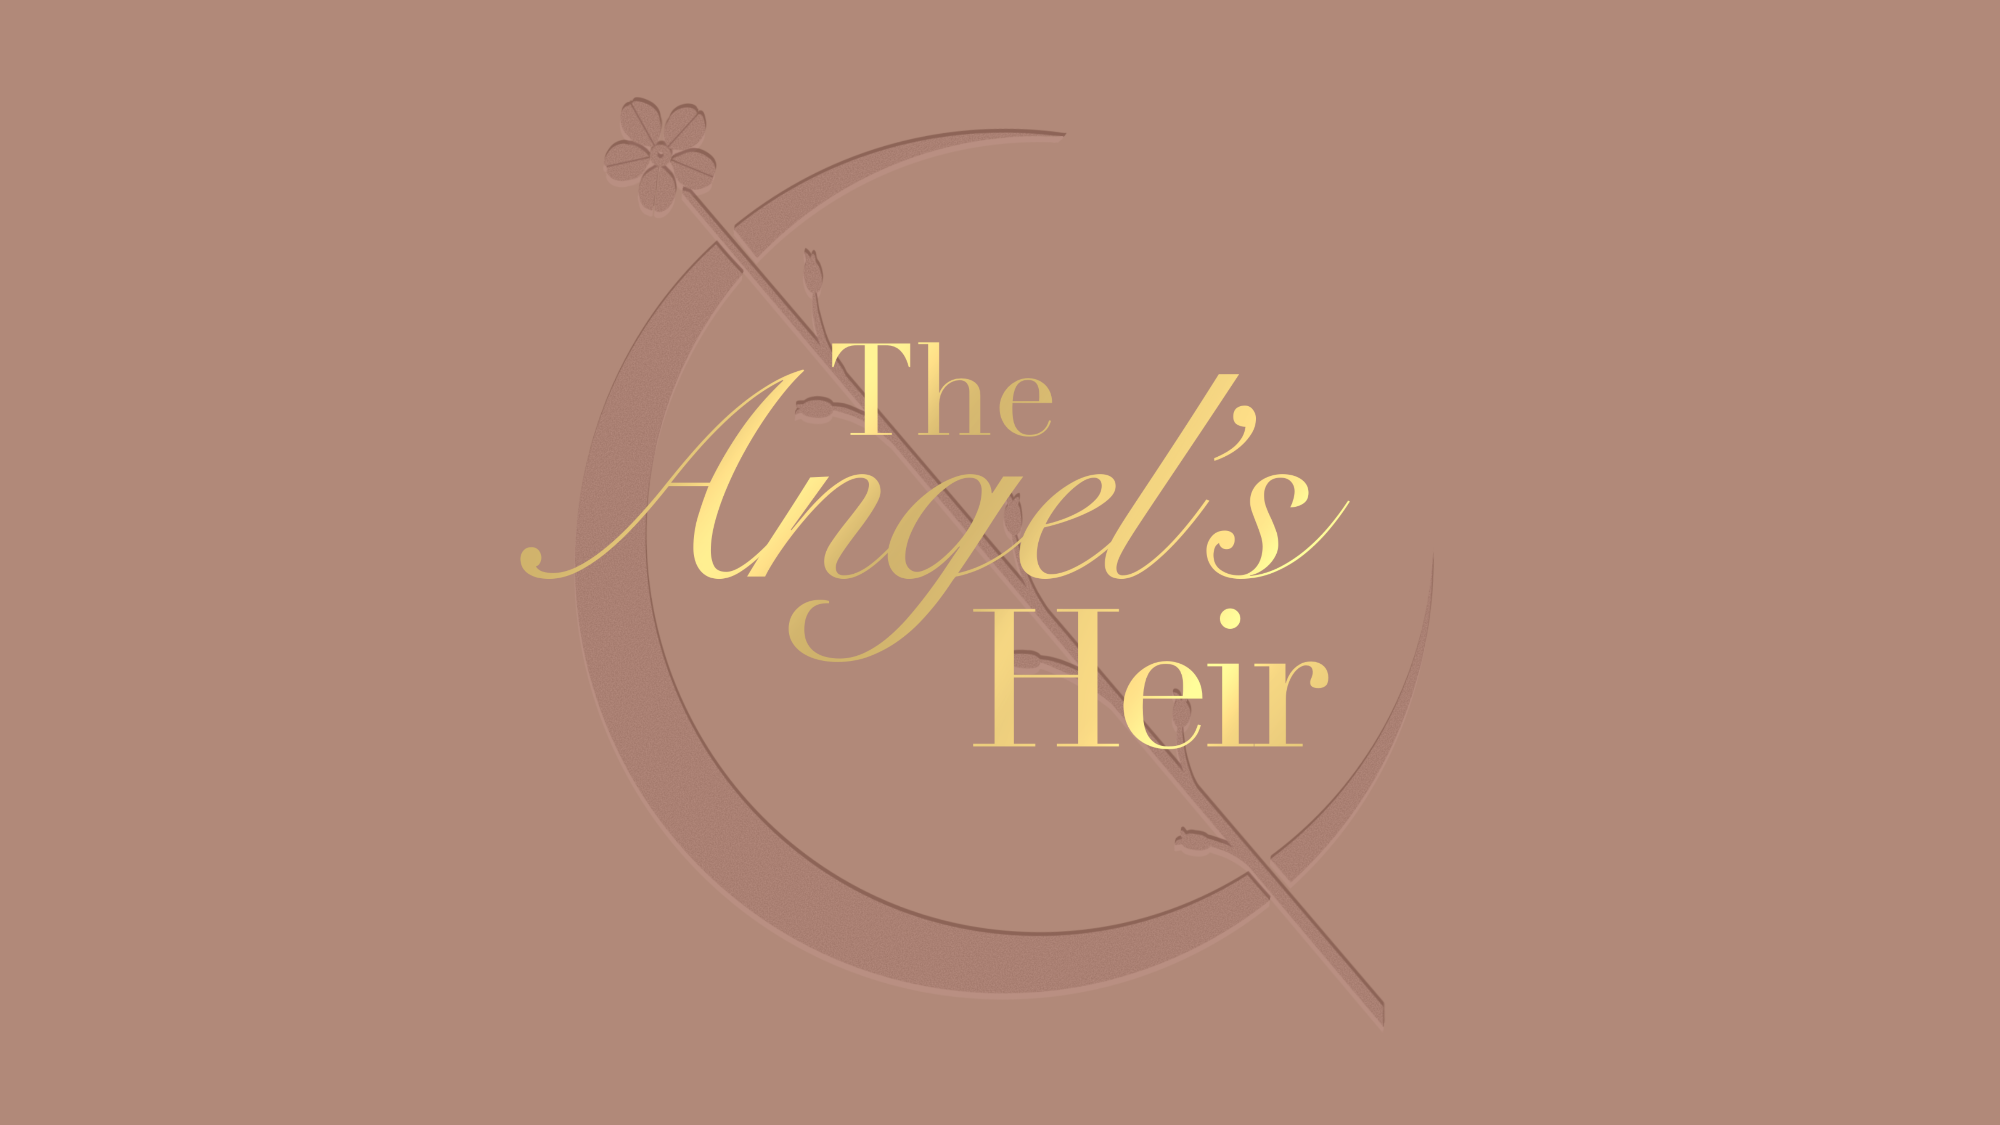 The Angel's Heir: Prologue